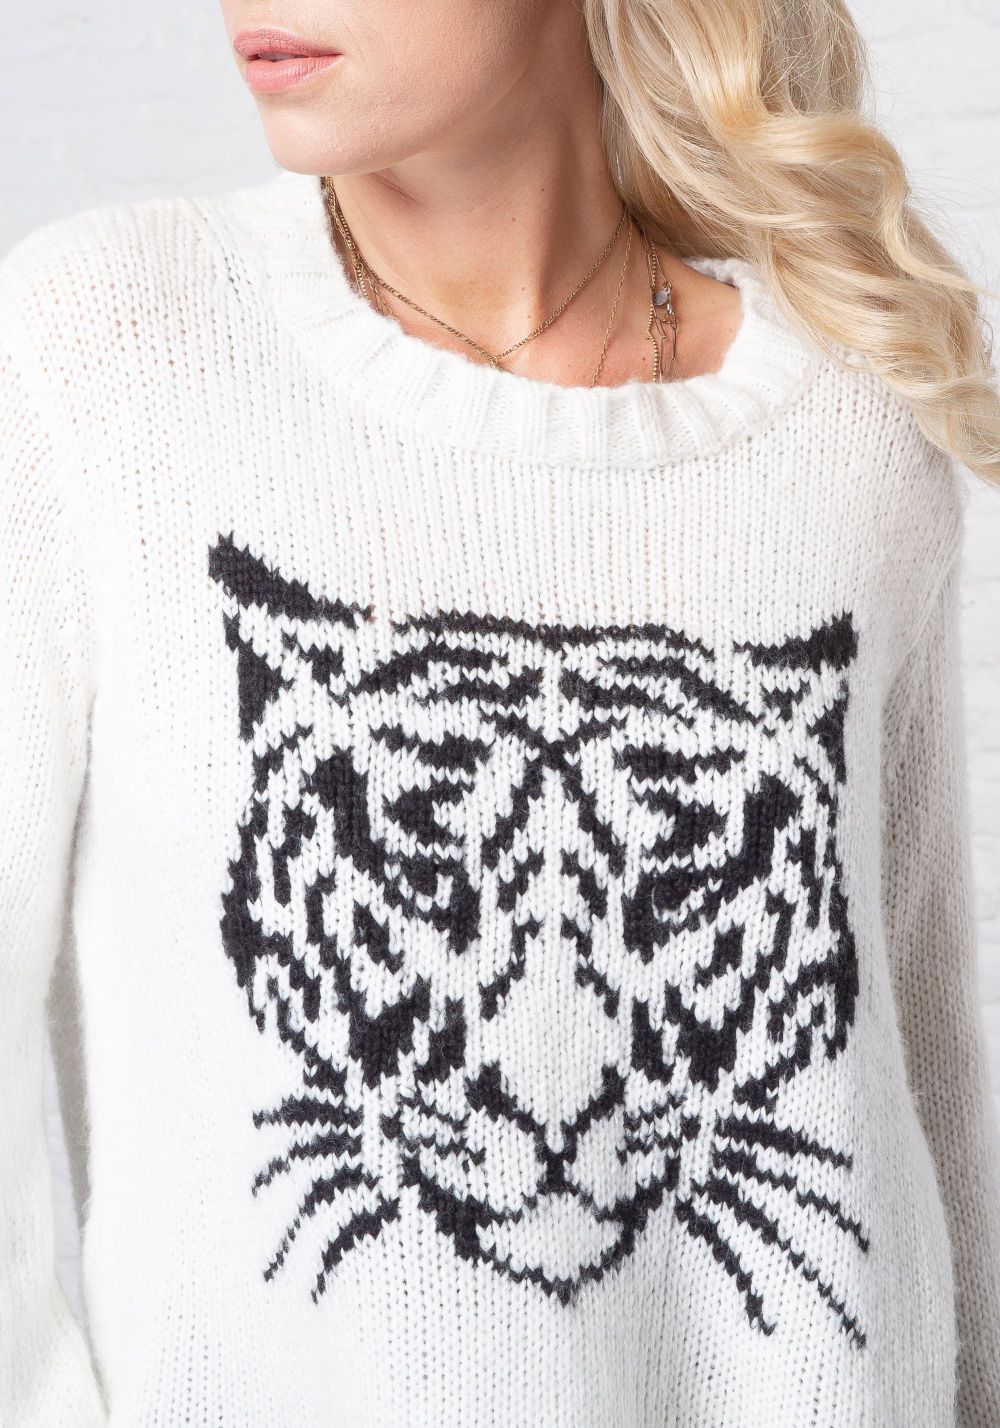 TIGER FACE CHUNKY KNIT SWEATER - WOODEN SHIPS